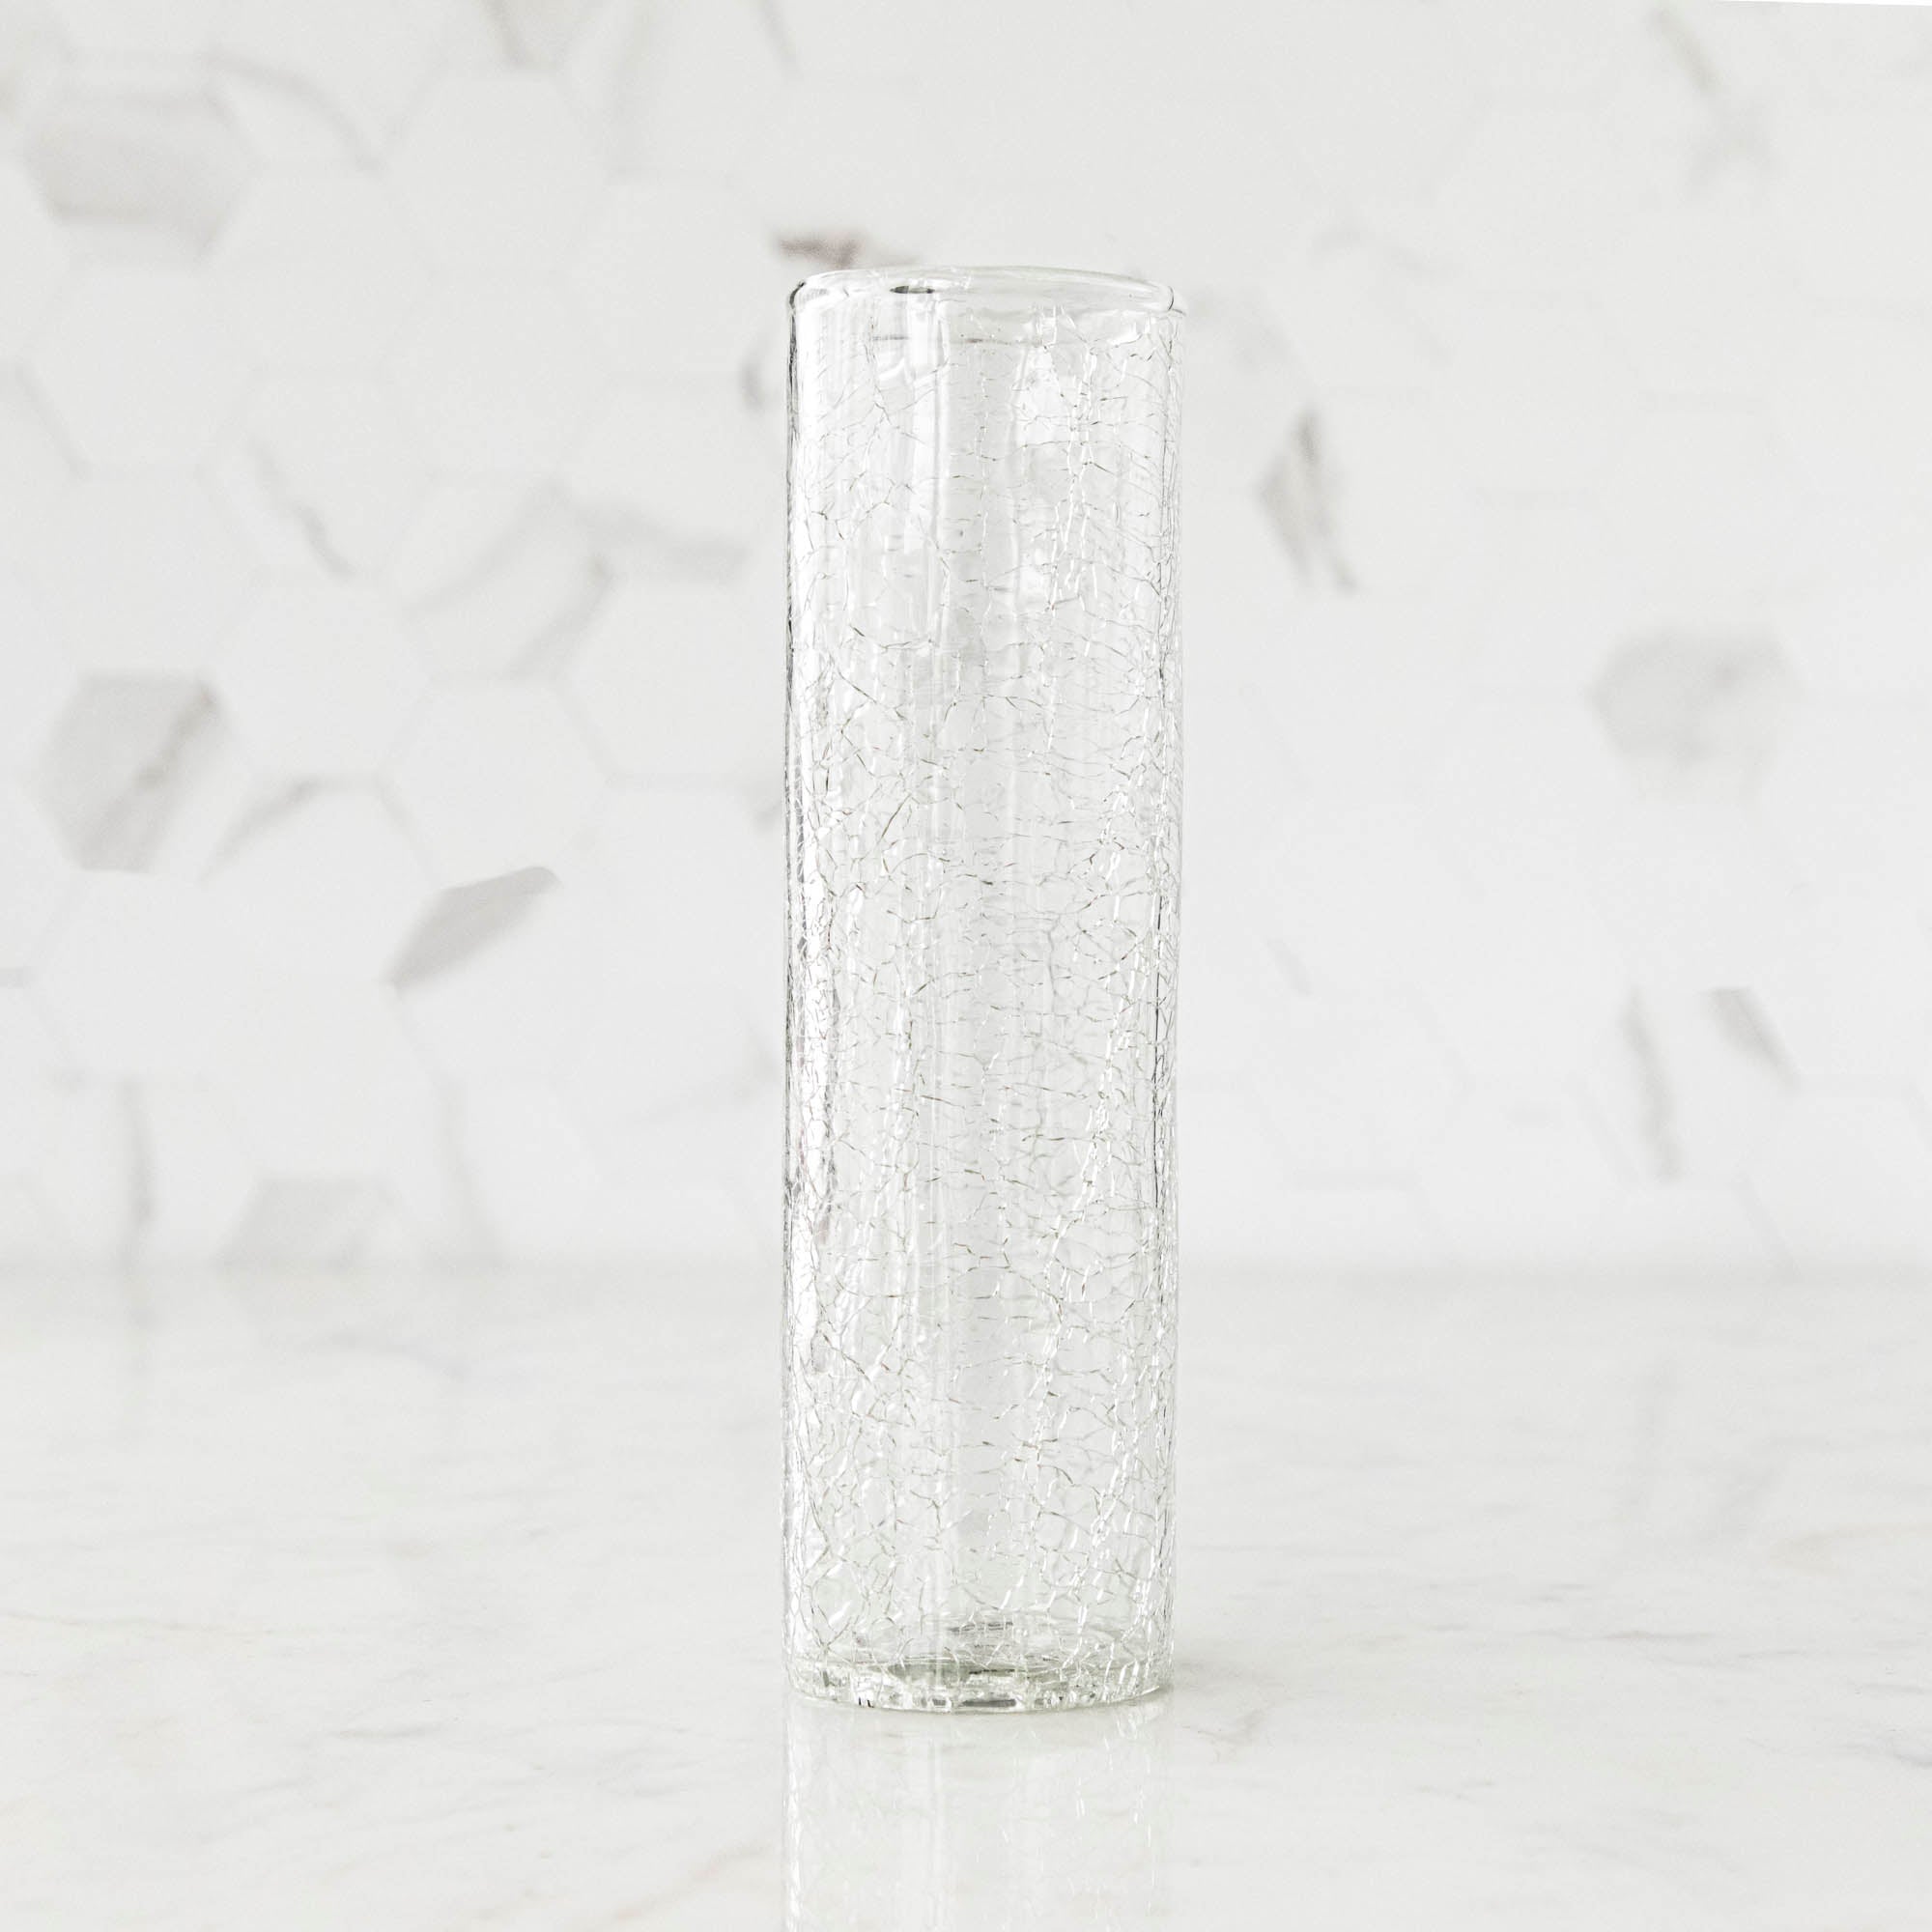 A tall Norwell Champagne Flute sitting on top of a marble counter.